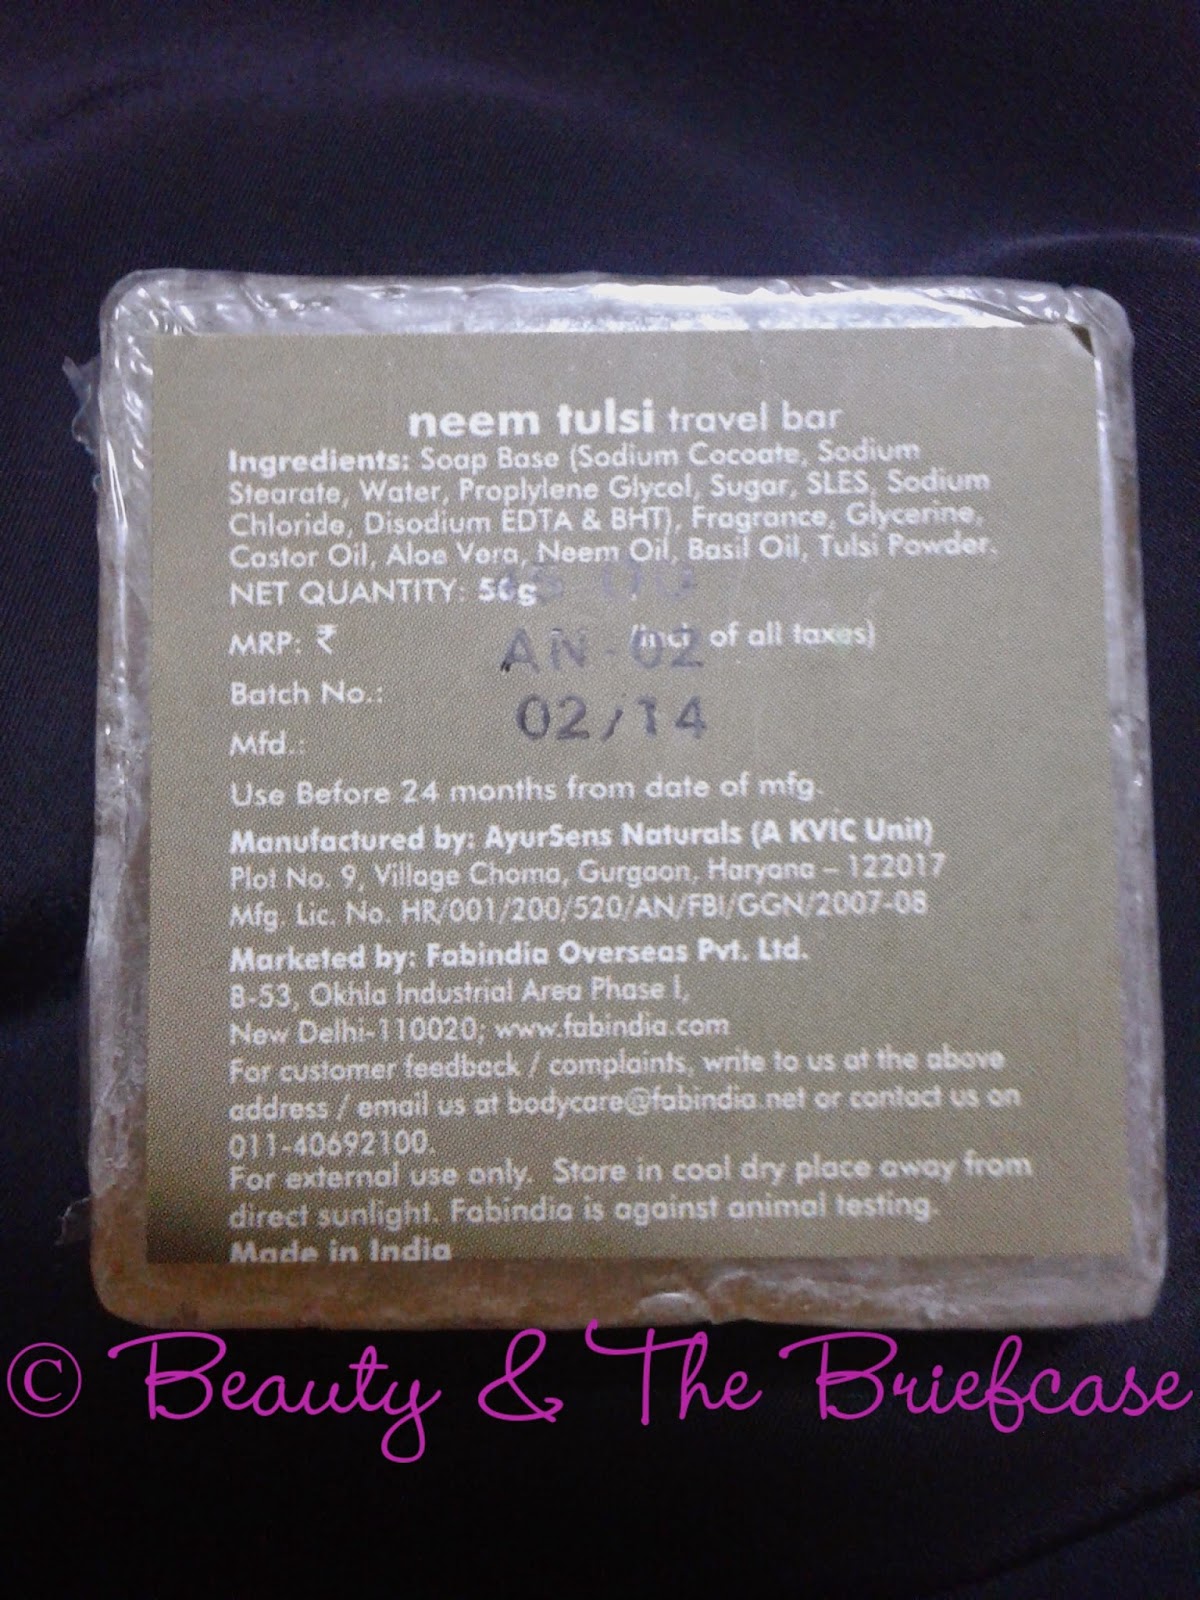 Beauty & The Briefcase: Fab India Neem Tulsi Soap Review & Price